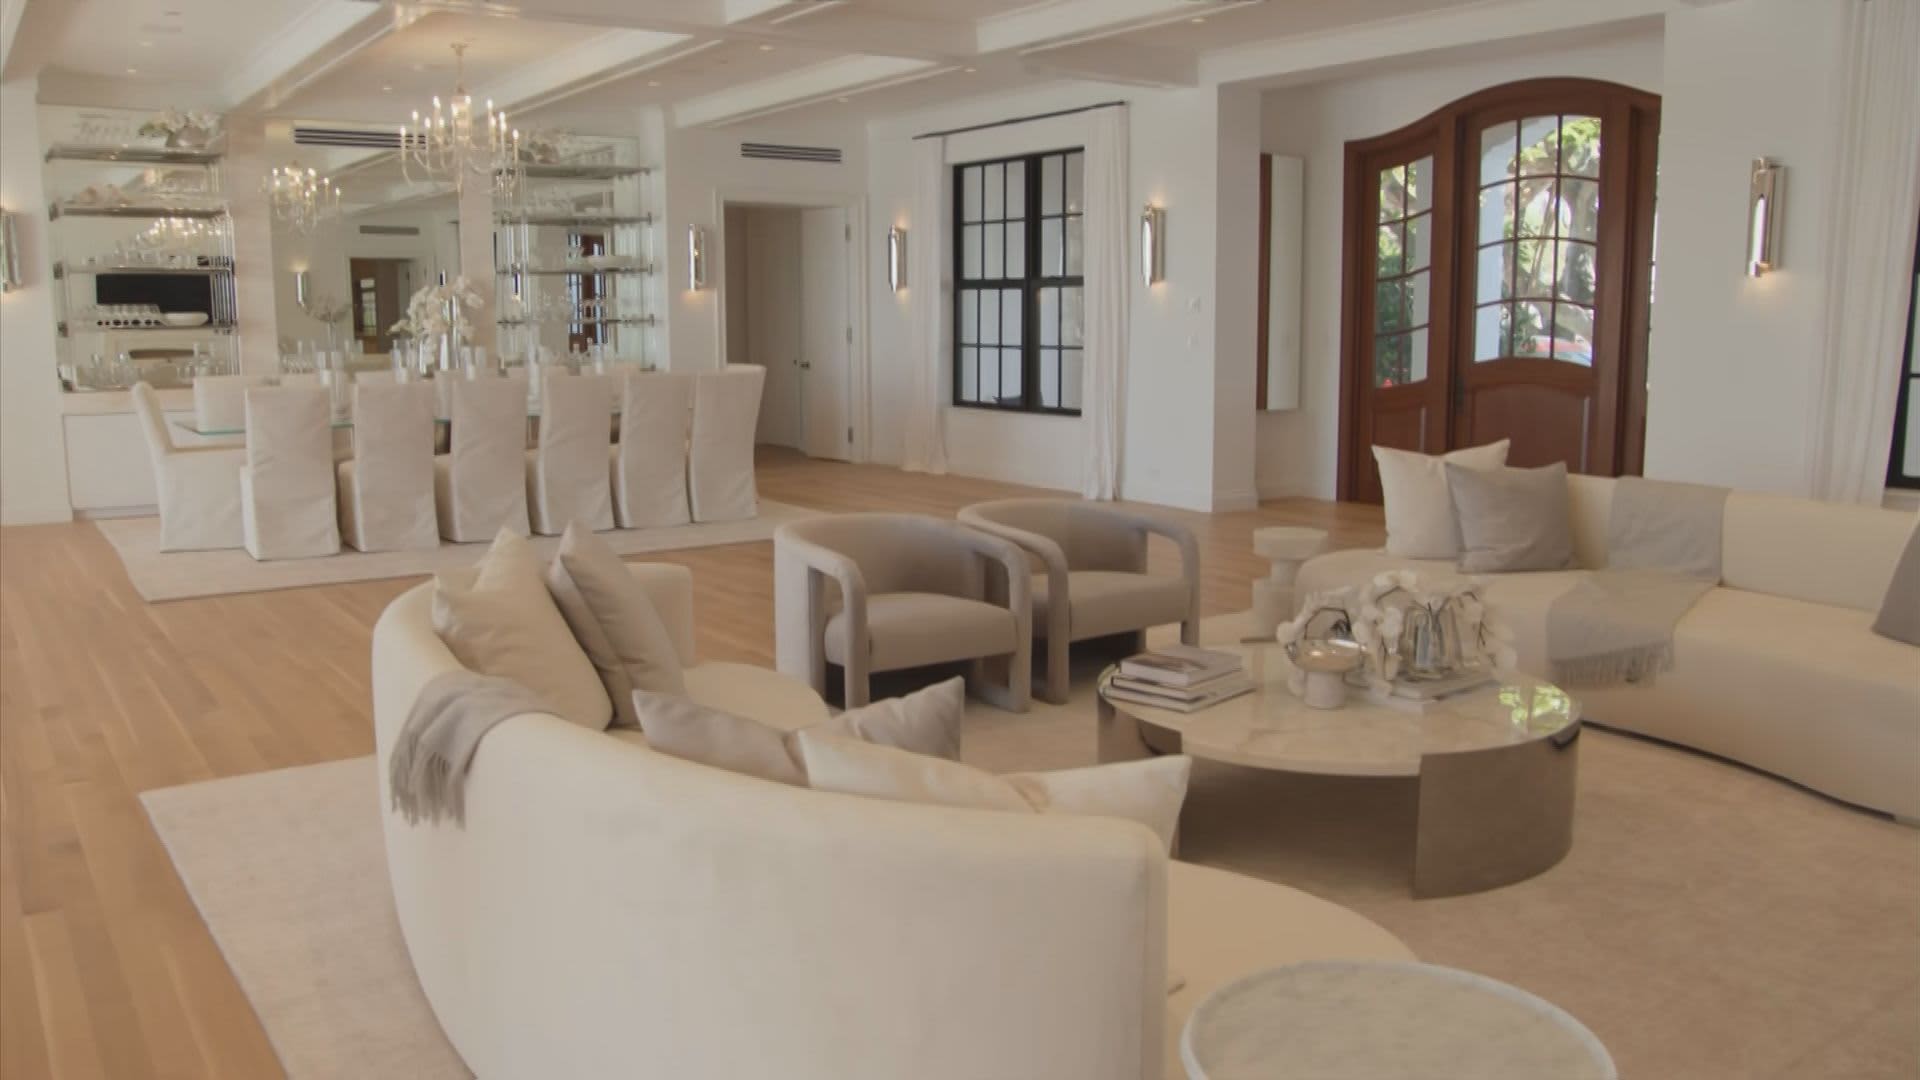 A living space inside the main home on Tarpon Isle, a private island in Palm Beach, Florida, on sale for $218 million.